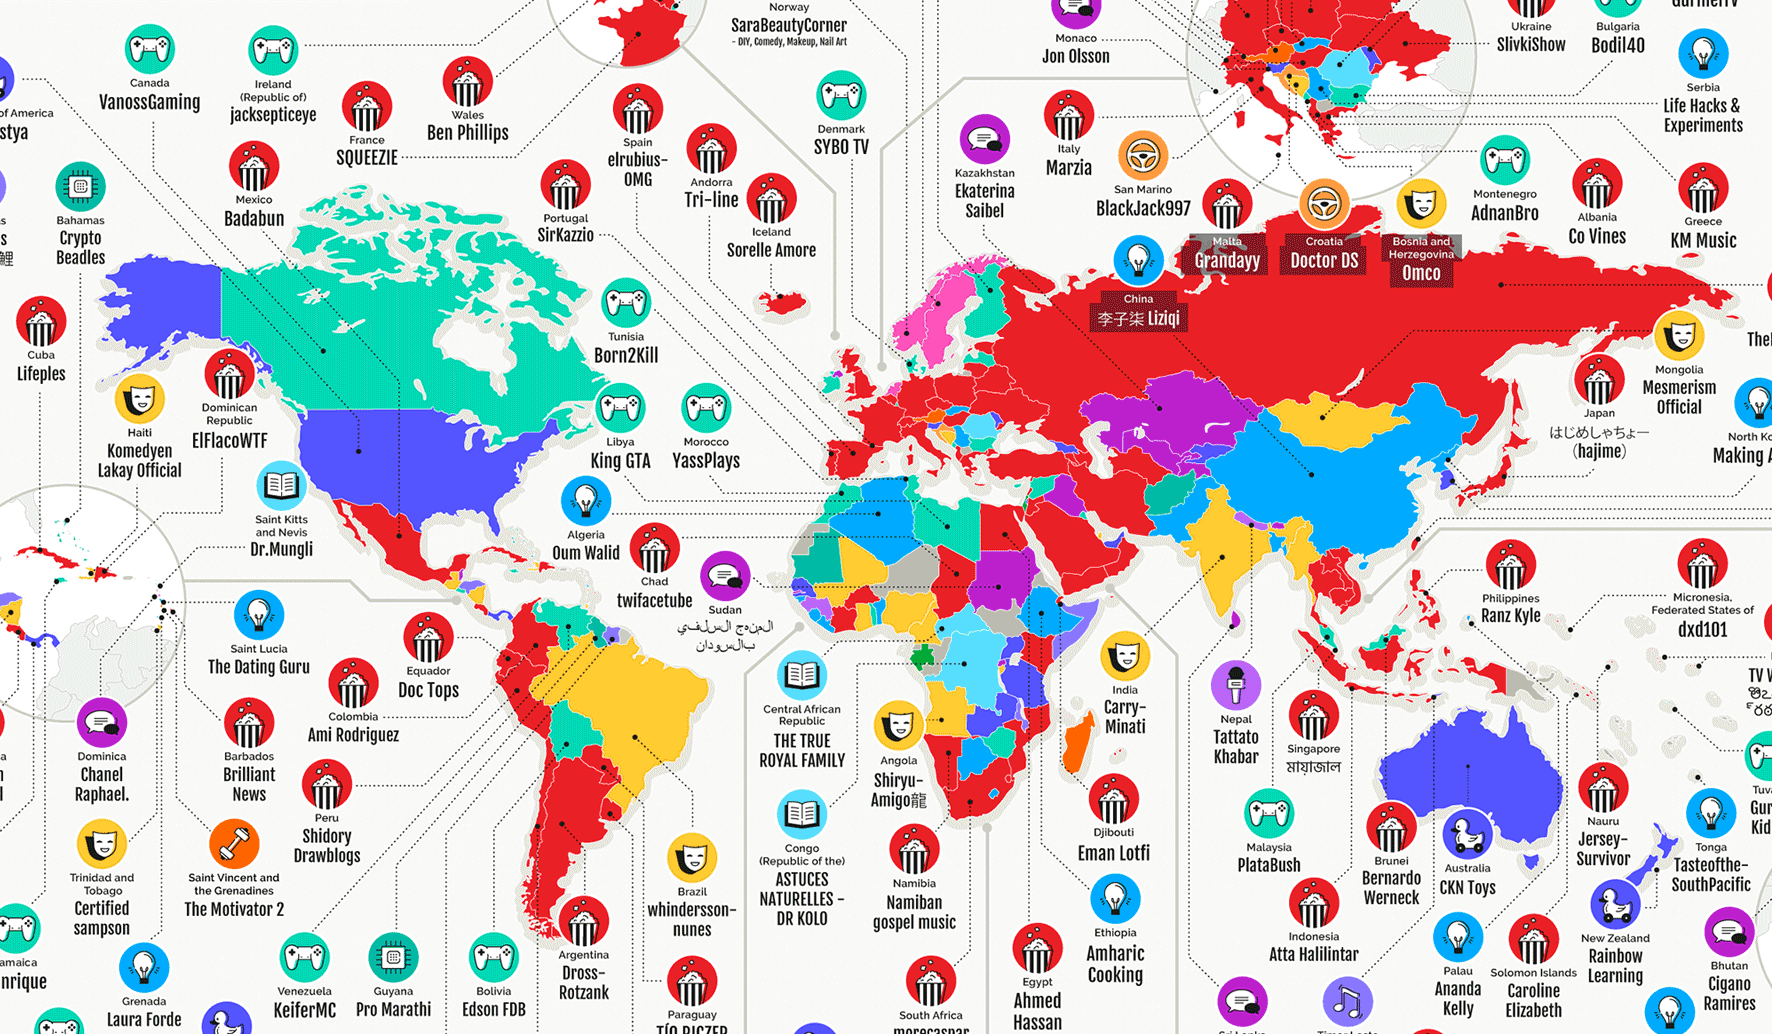 Who S The Most Popular Youtuber In Every Country - roblox kick off hack may 2019 works youtube